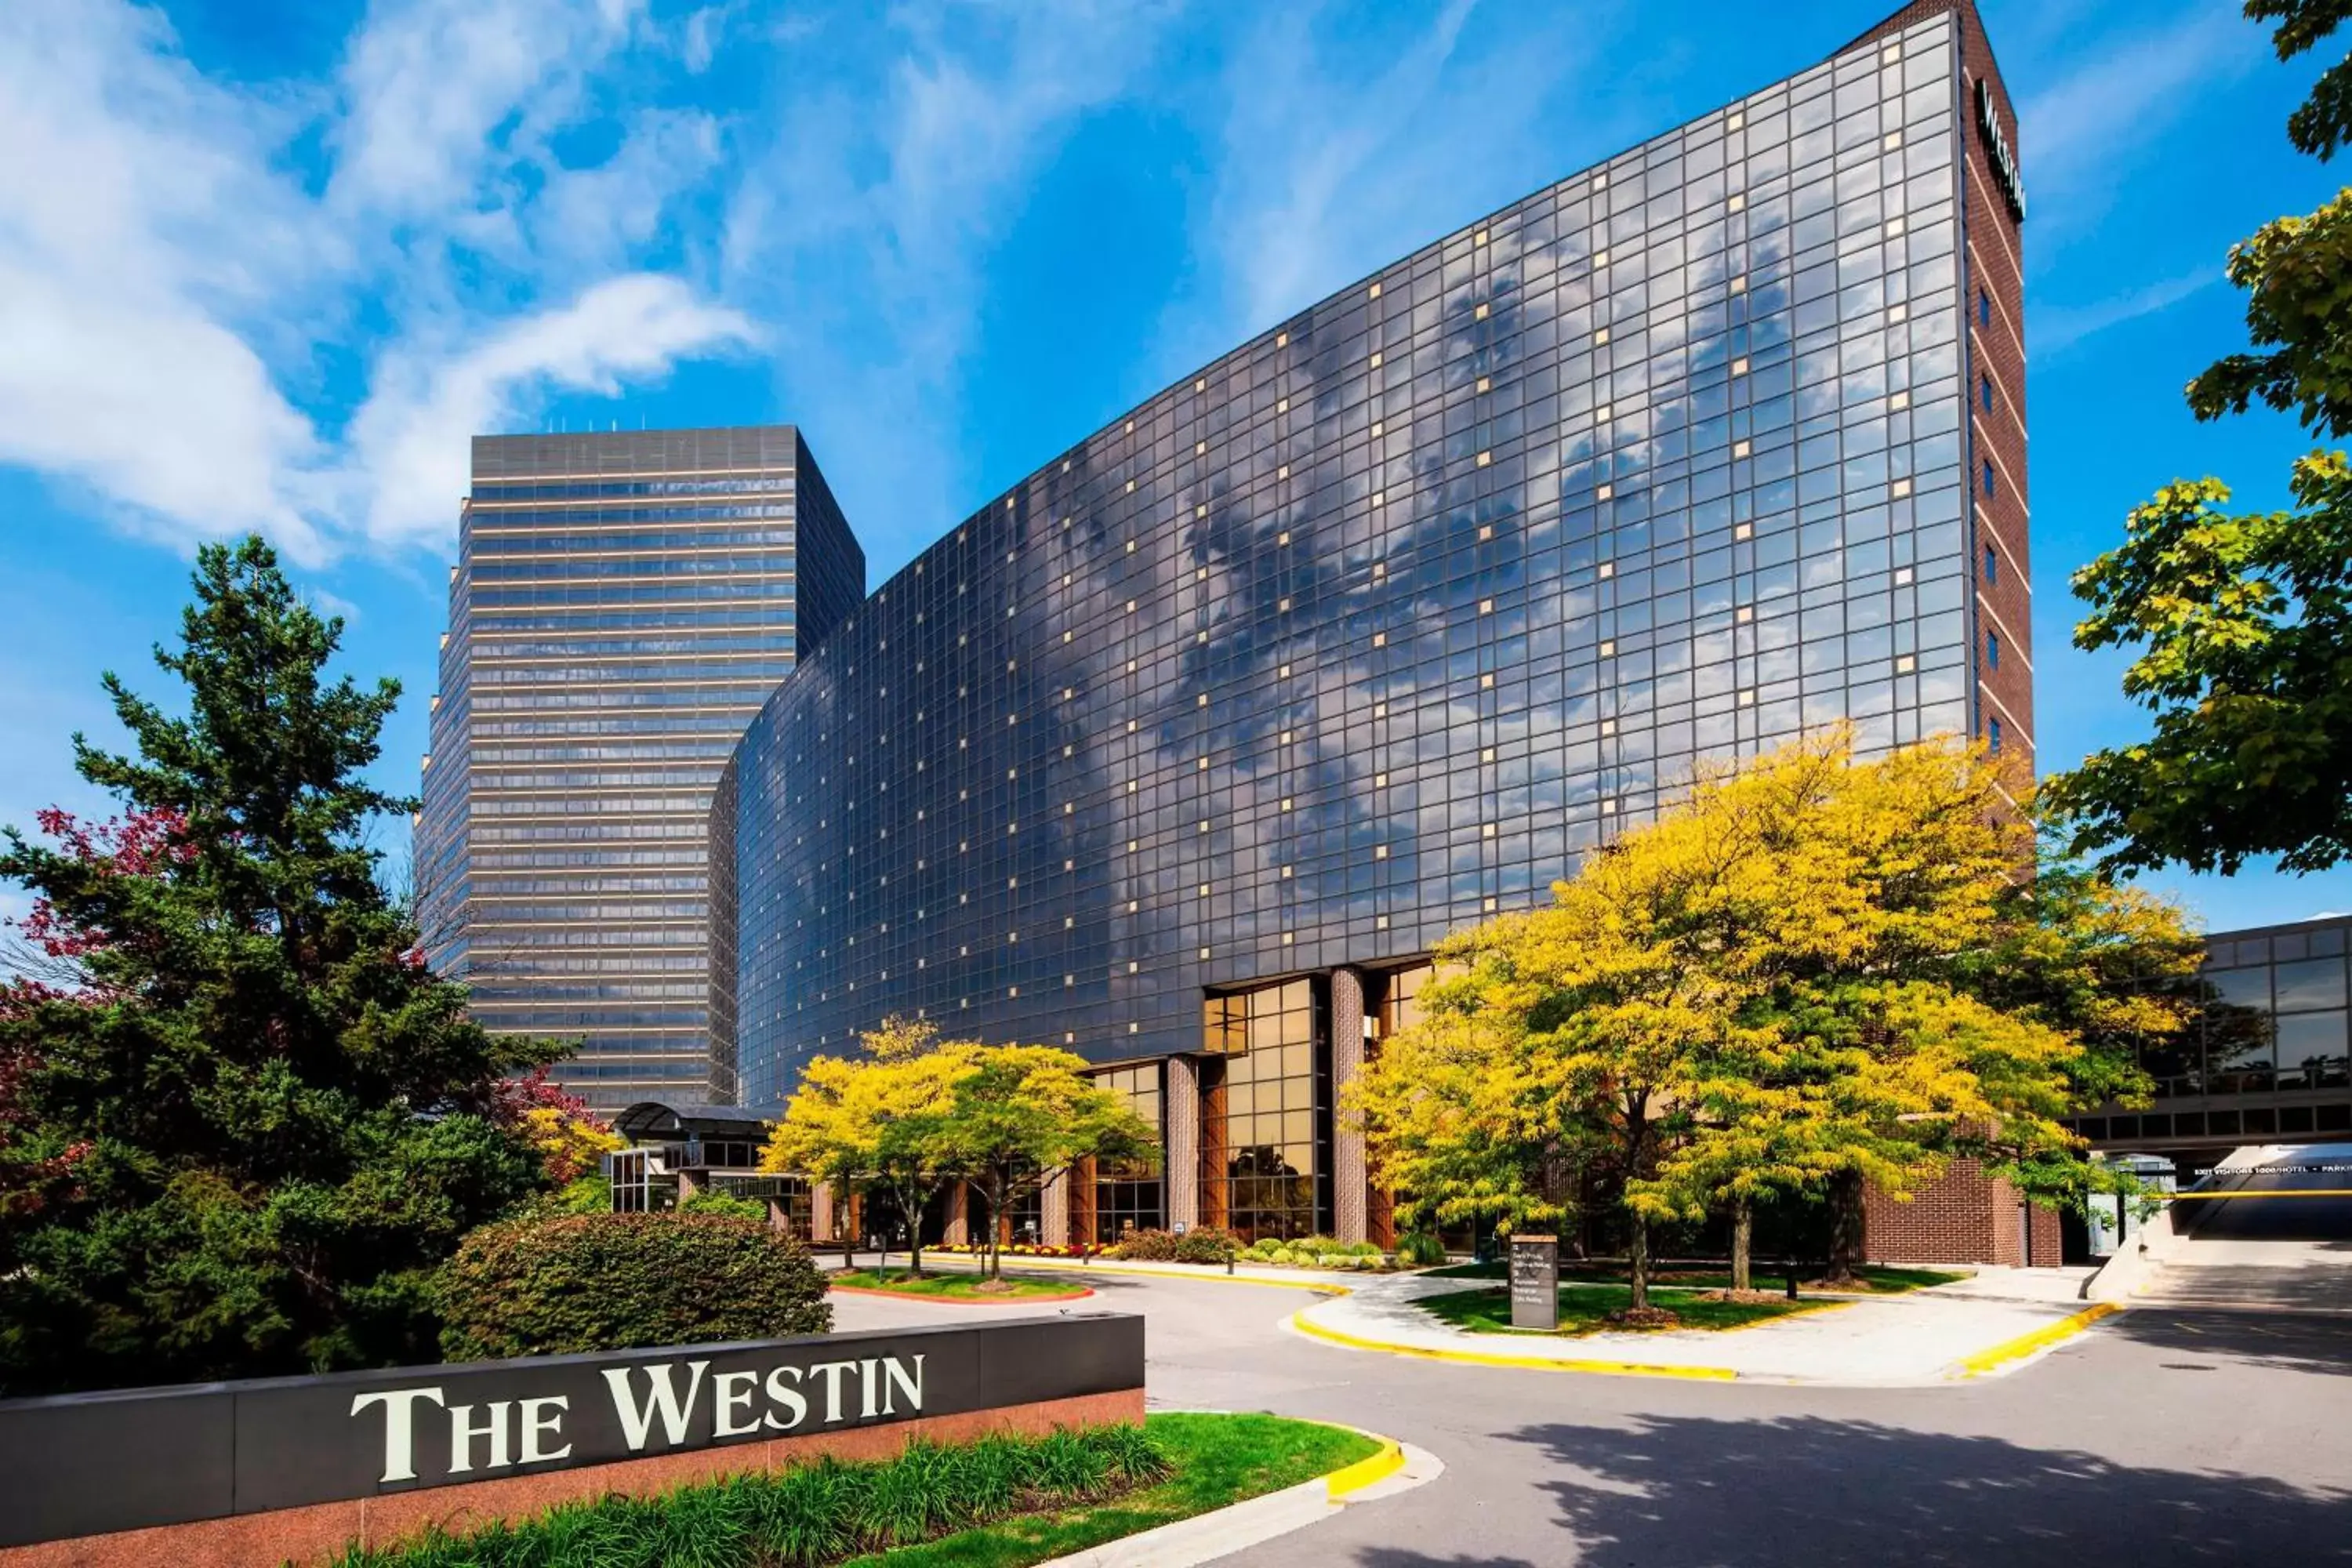 Property Building in The Westin Southfield Detroit